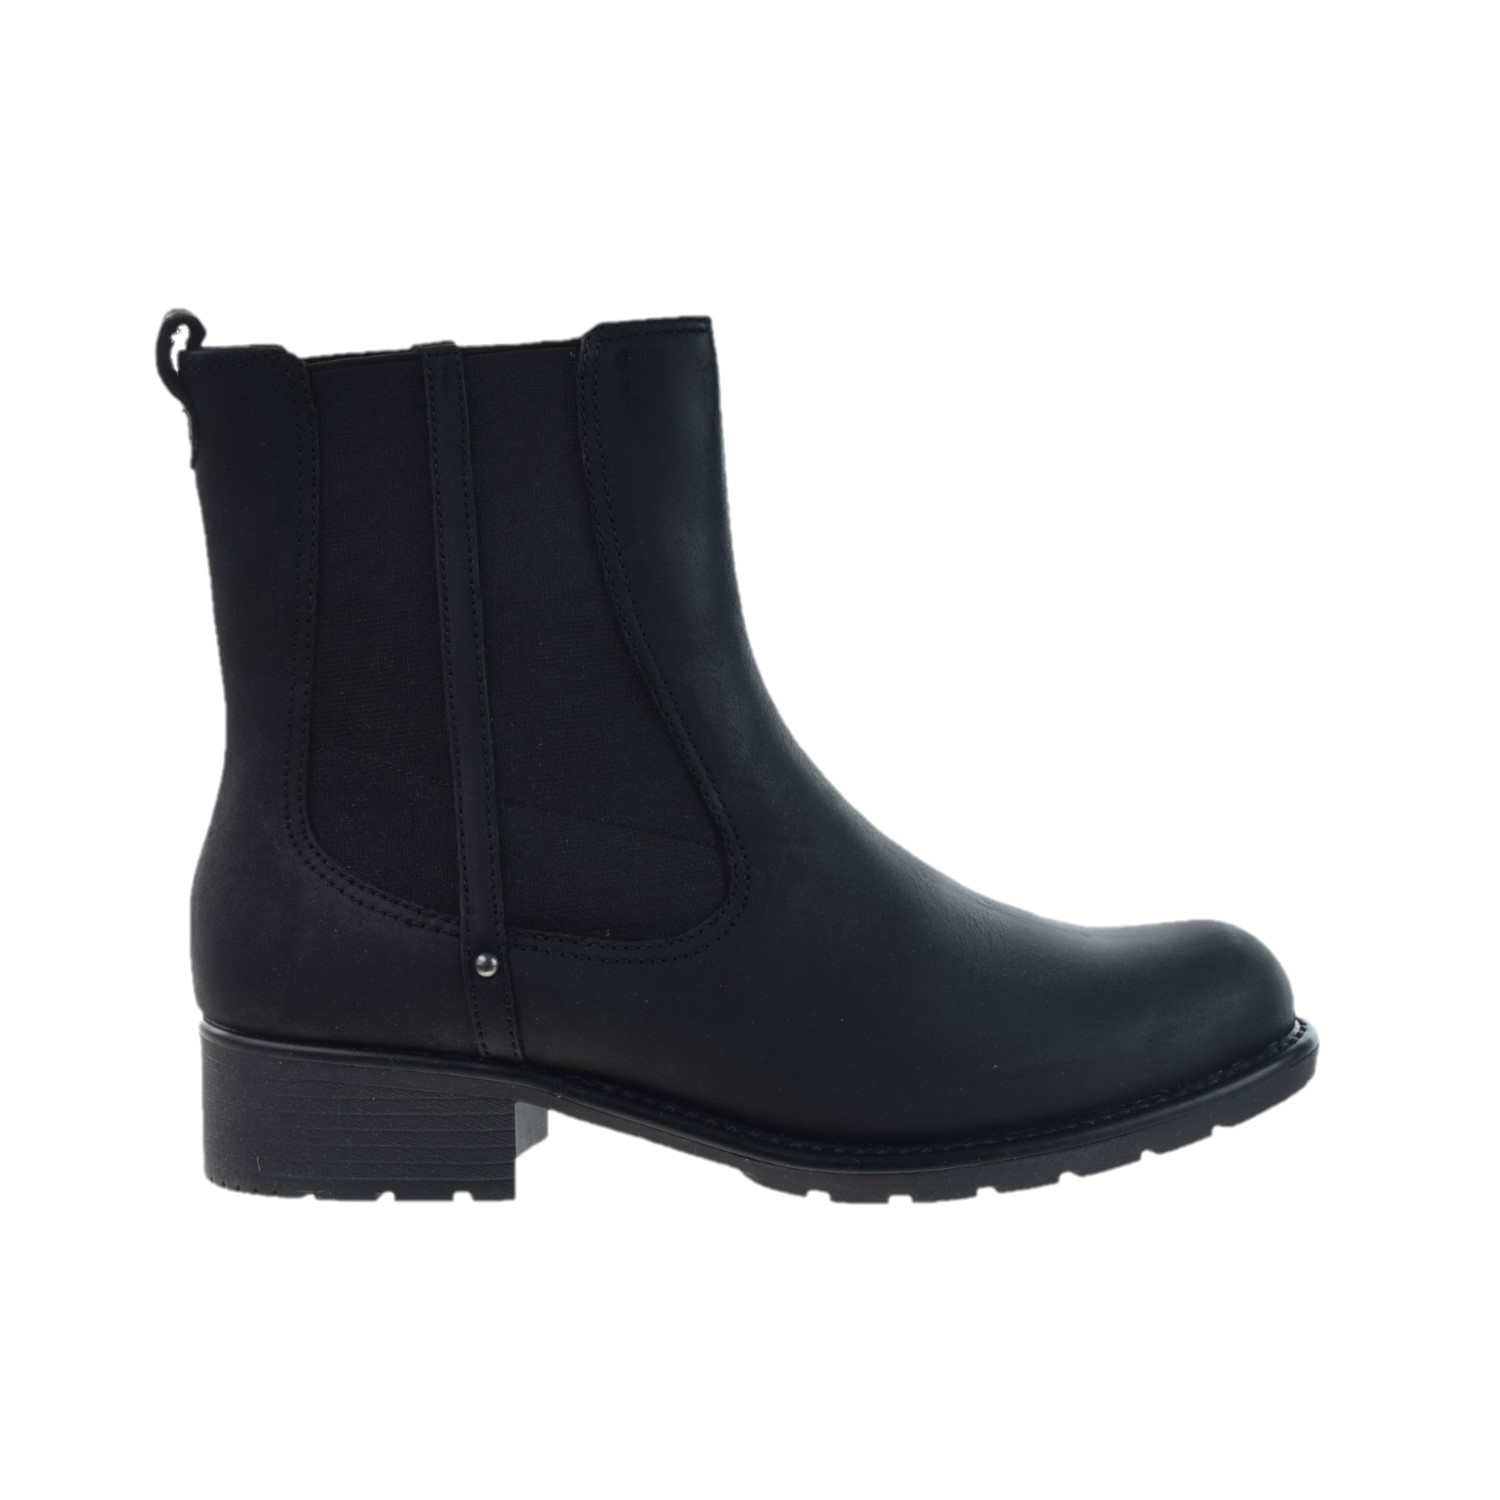 Women's Ankle Boots Black Leather 